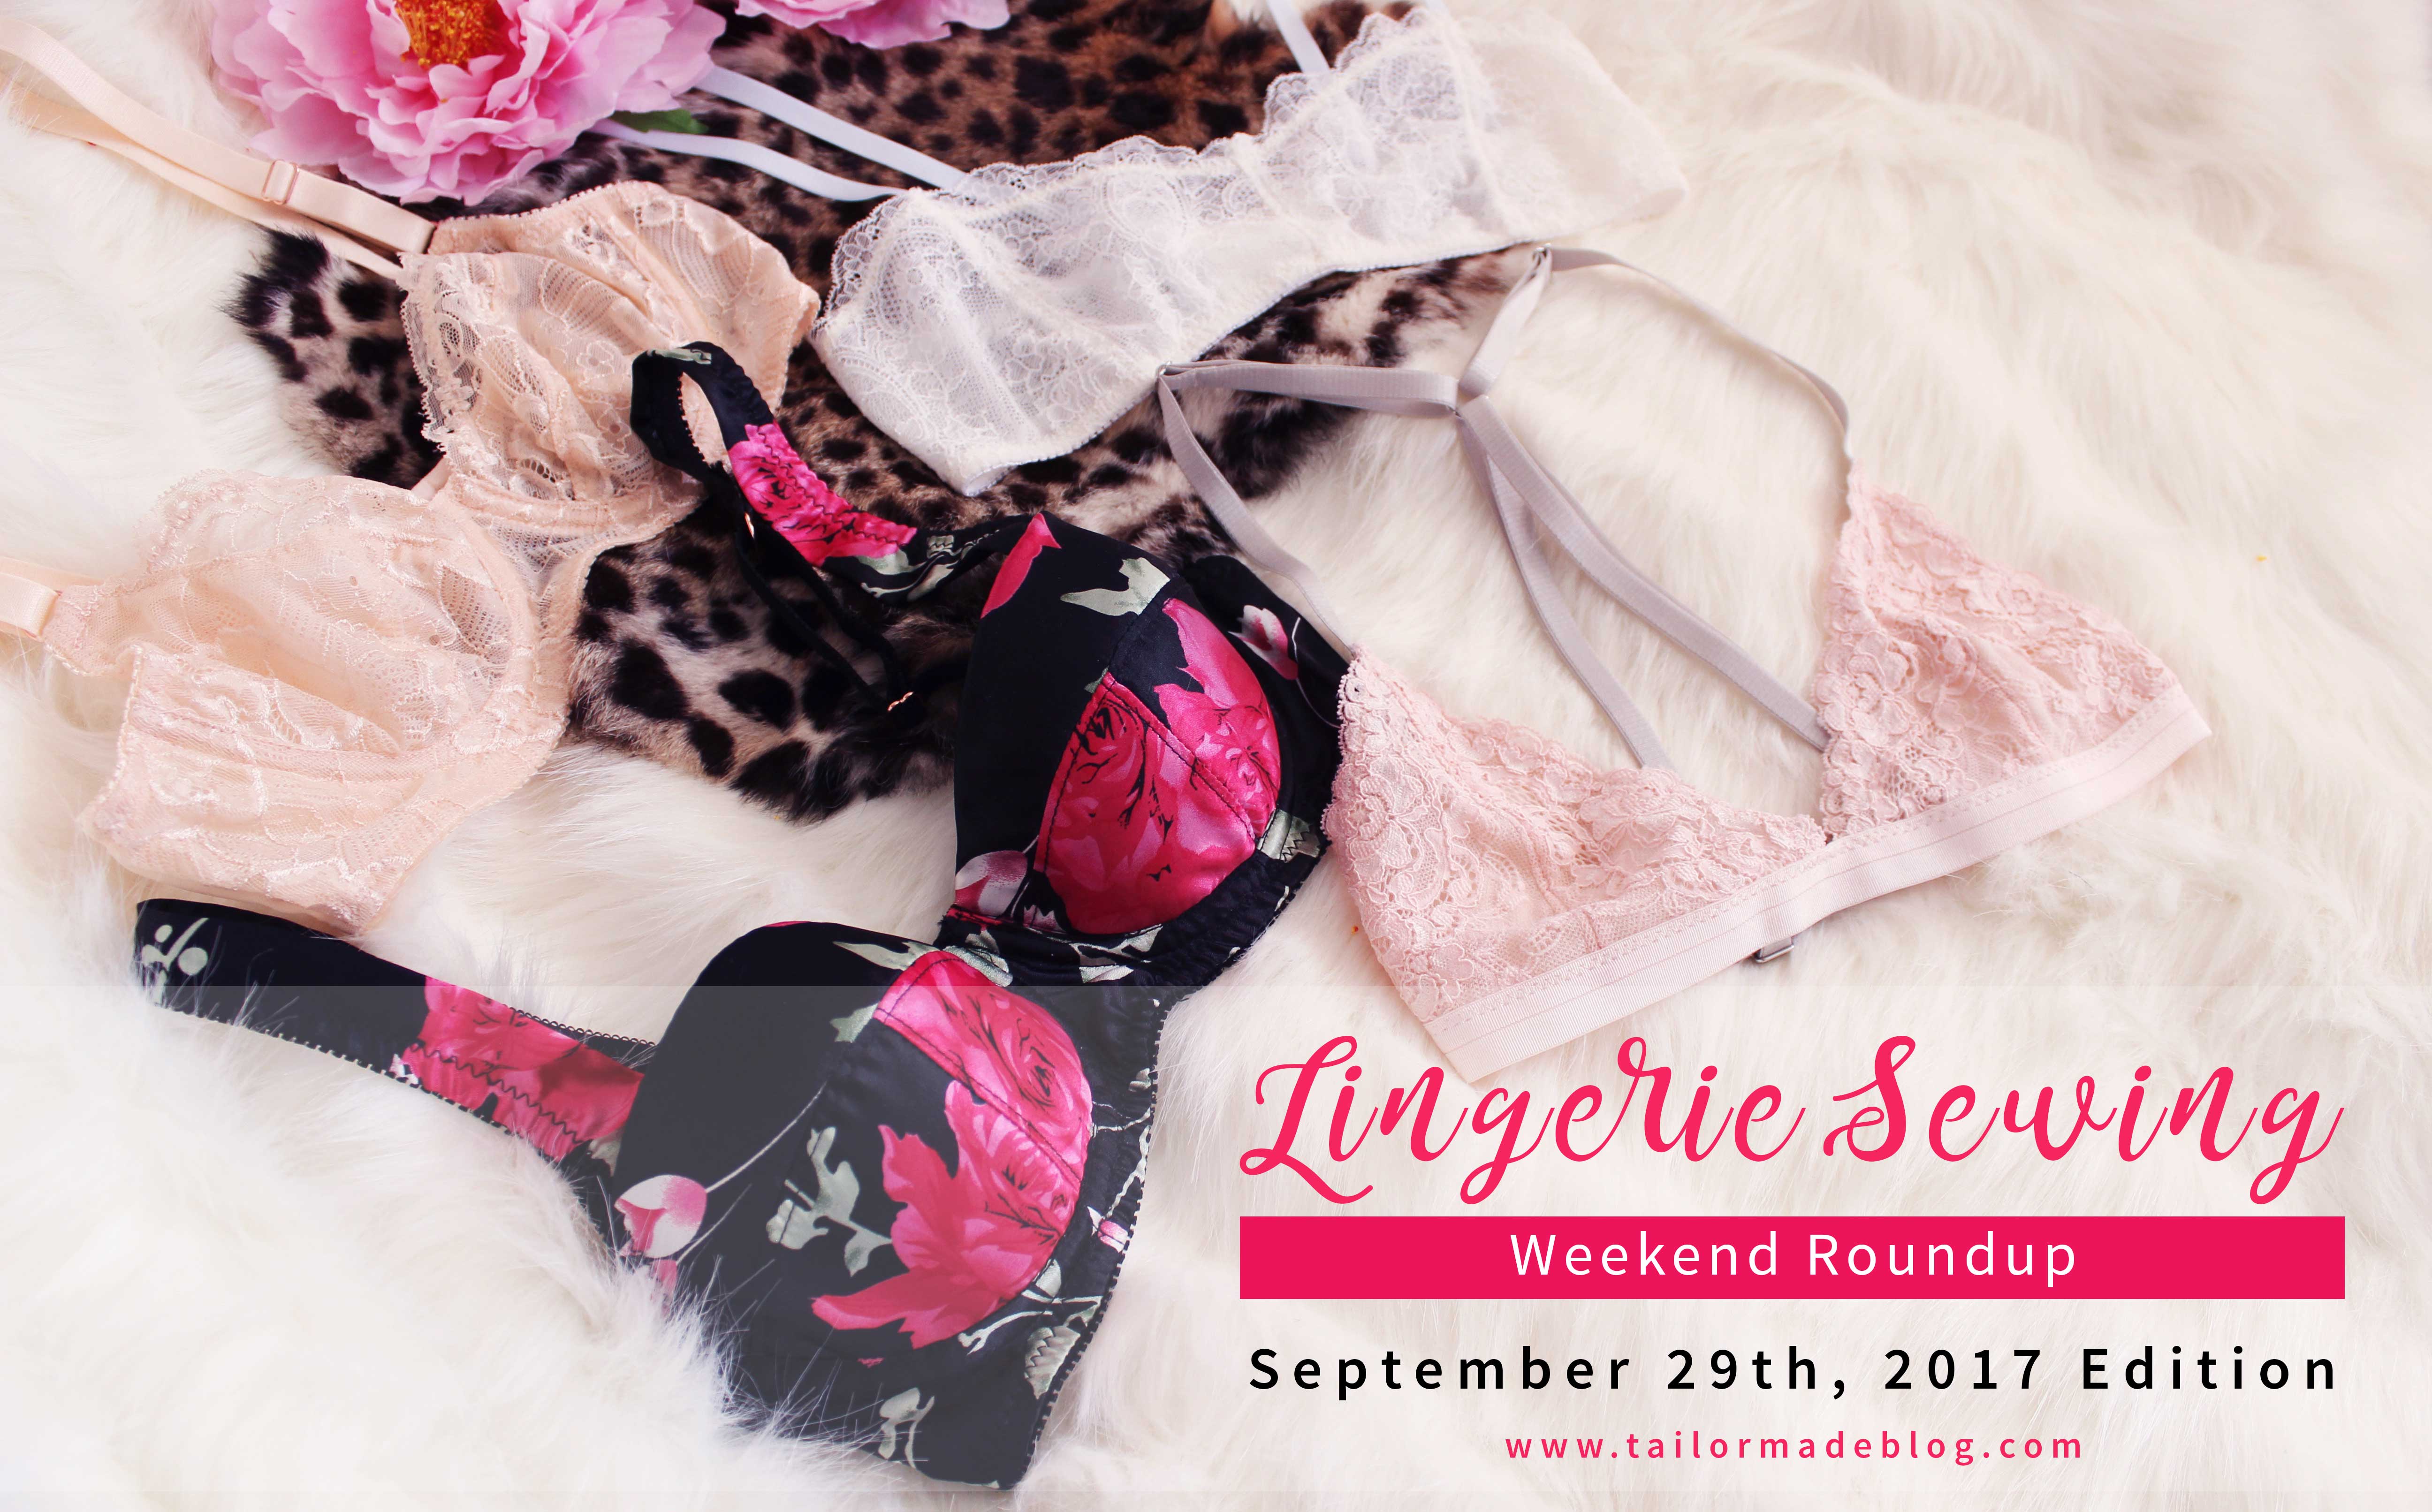 September 29th 2017 Lingerie Sewing Weekend Round Up Latest news and makes and sewing projects from the lingerie sewing bra making community